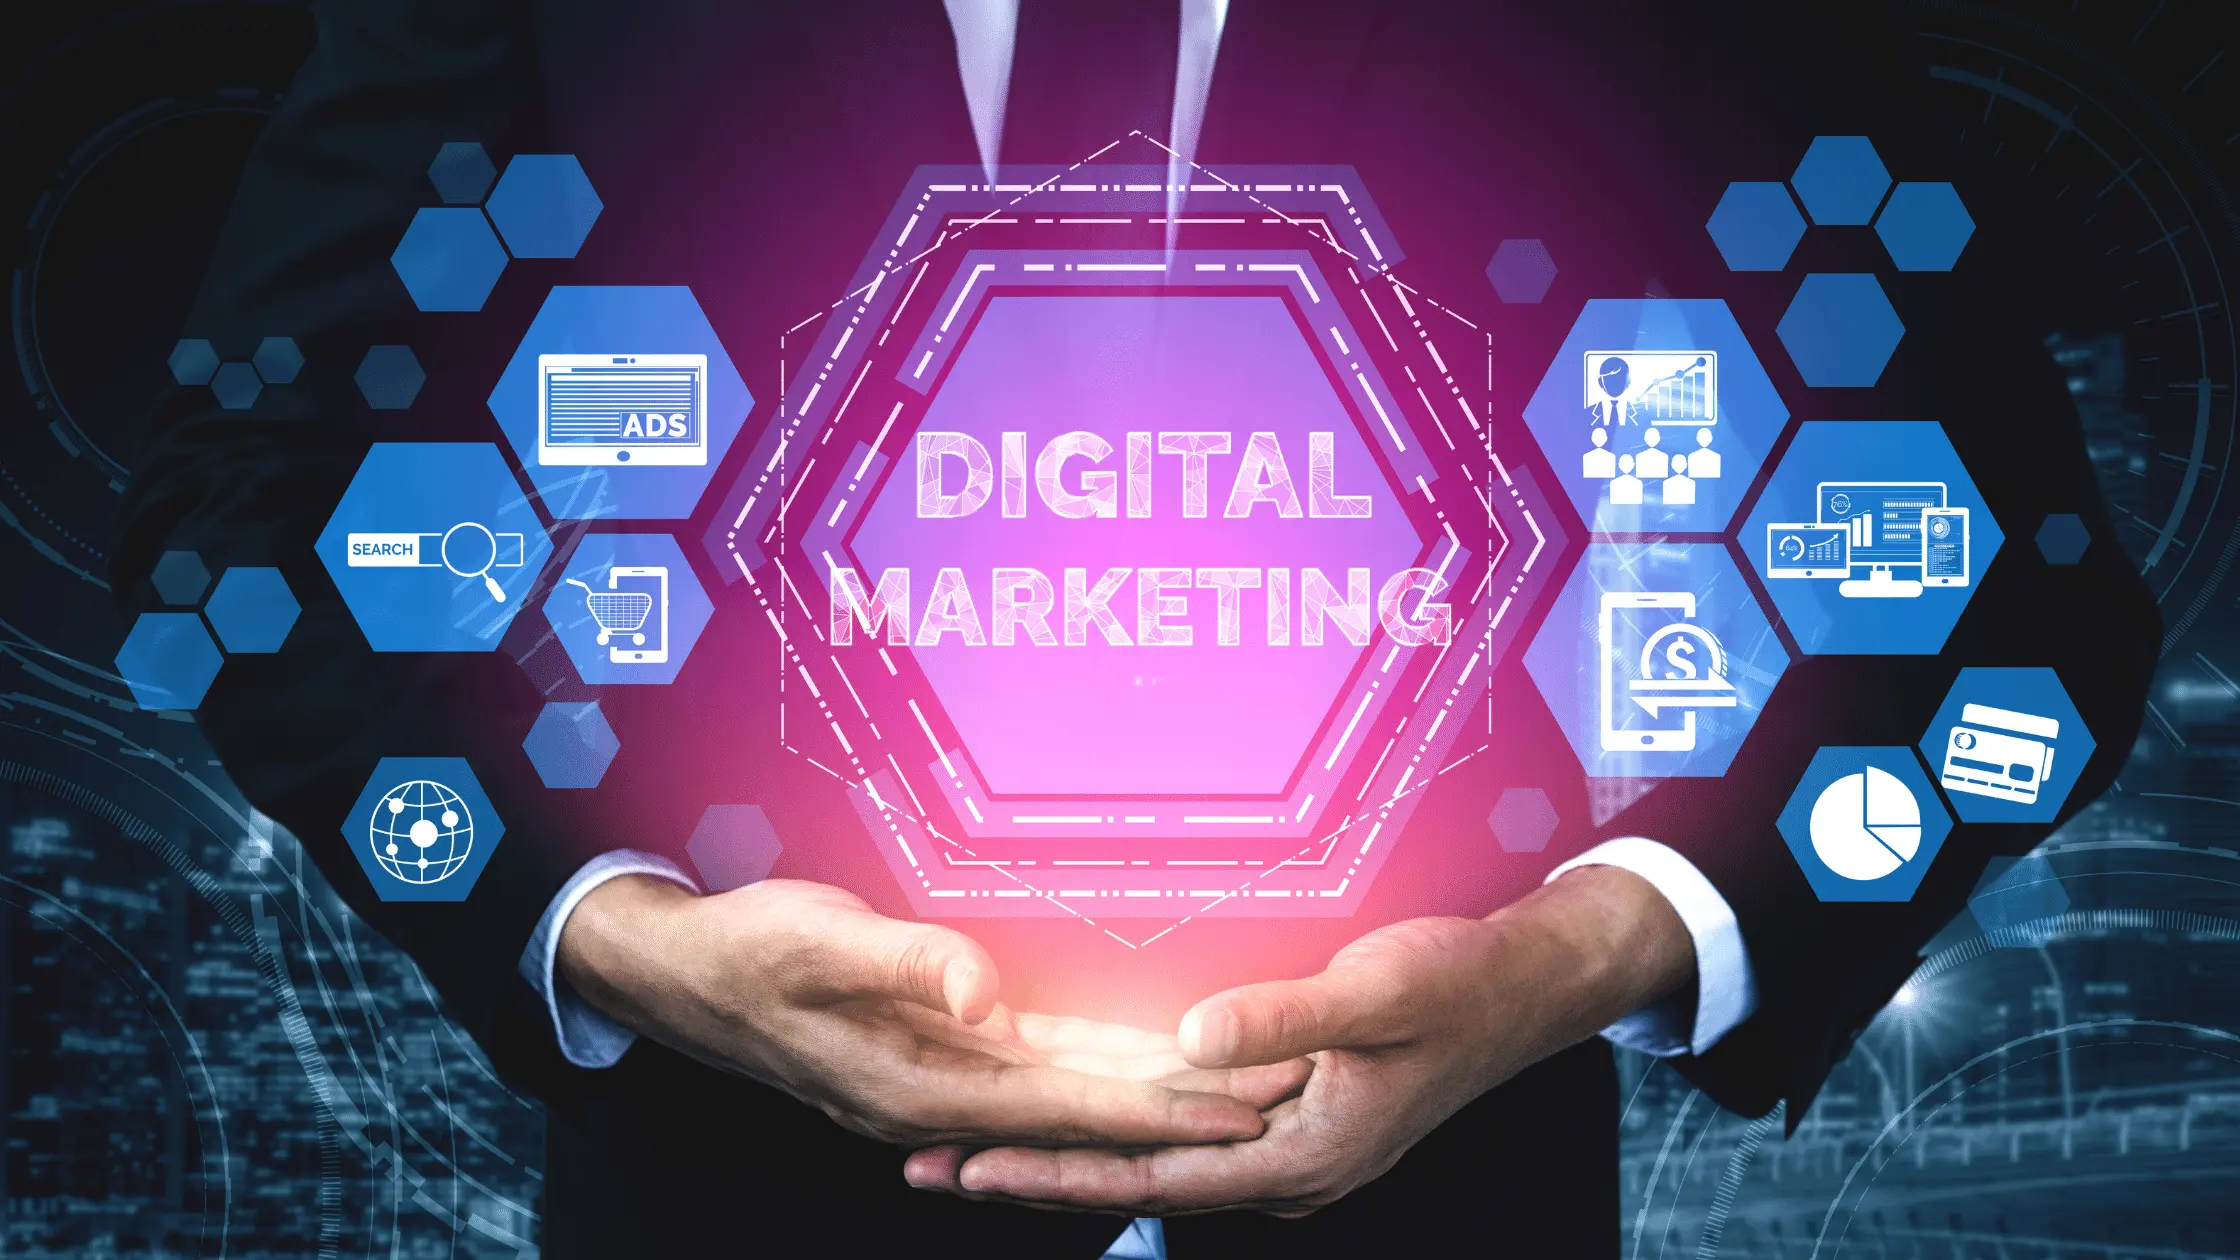 5 Common B2B digital marketing objectives, with best practices